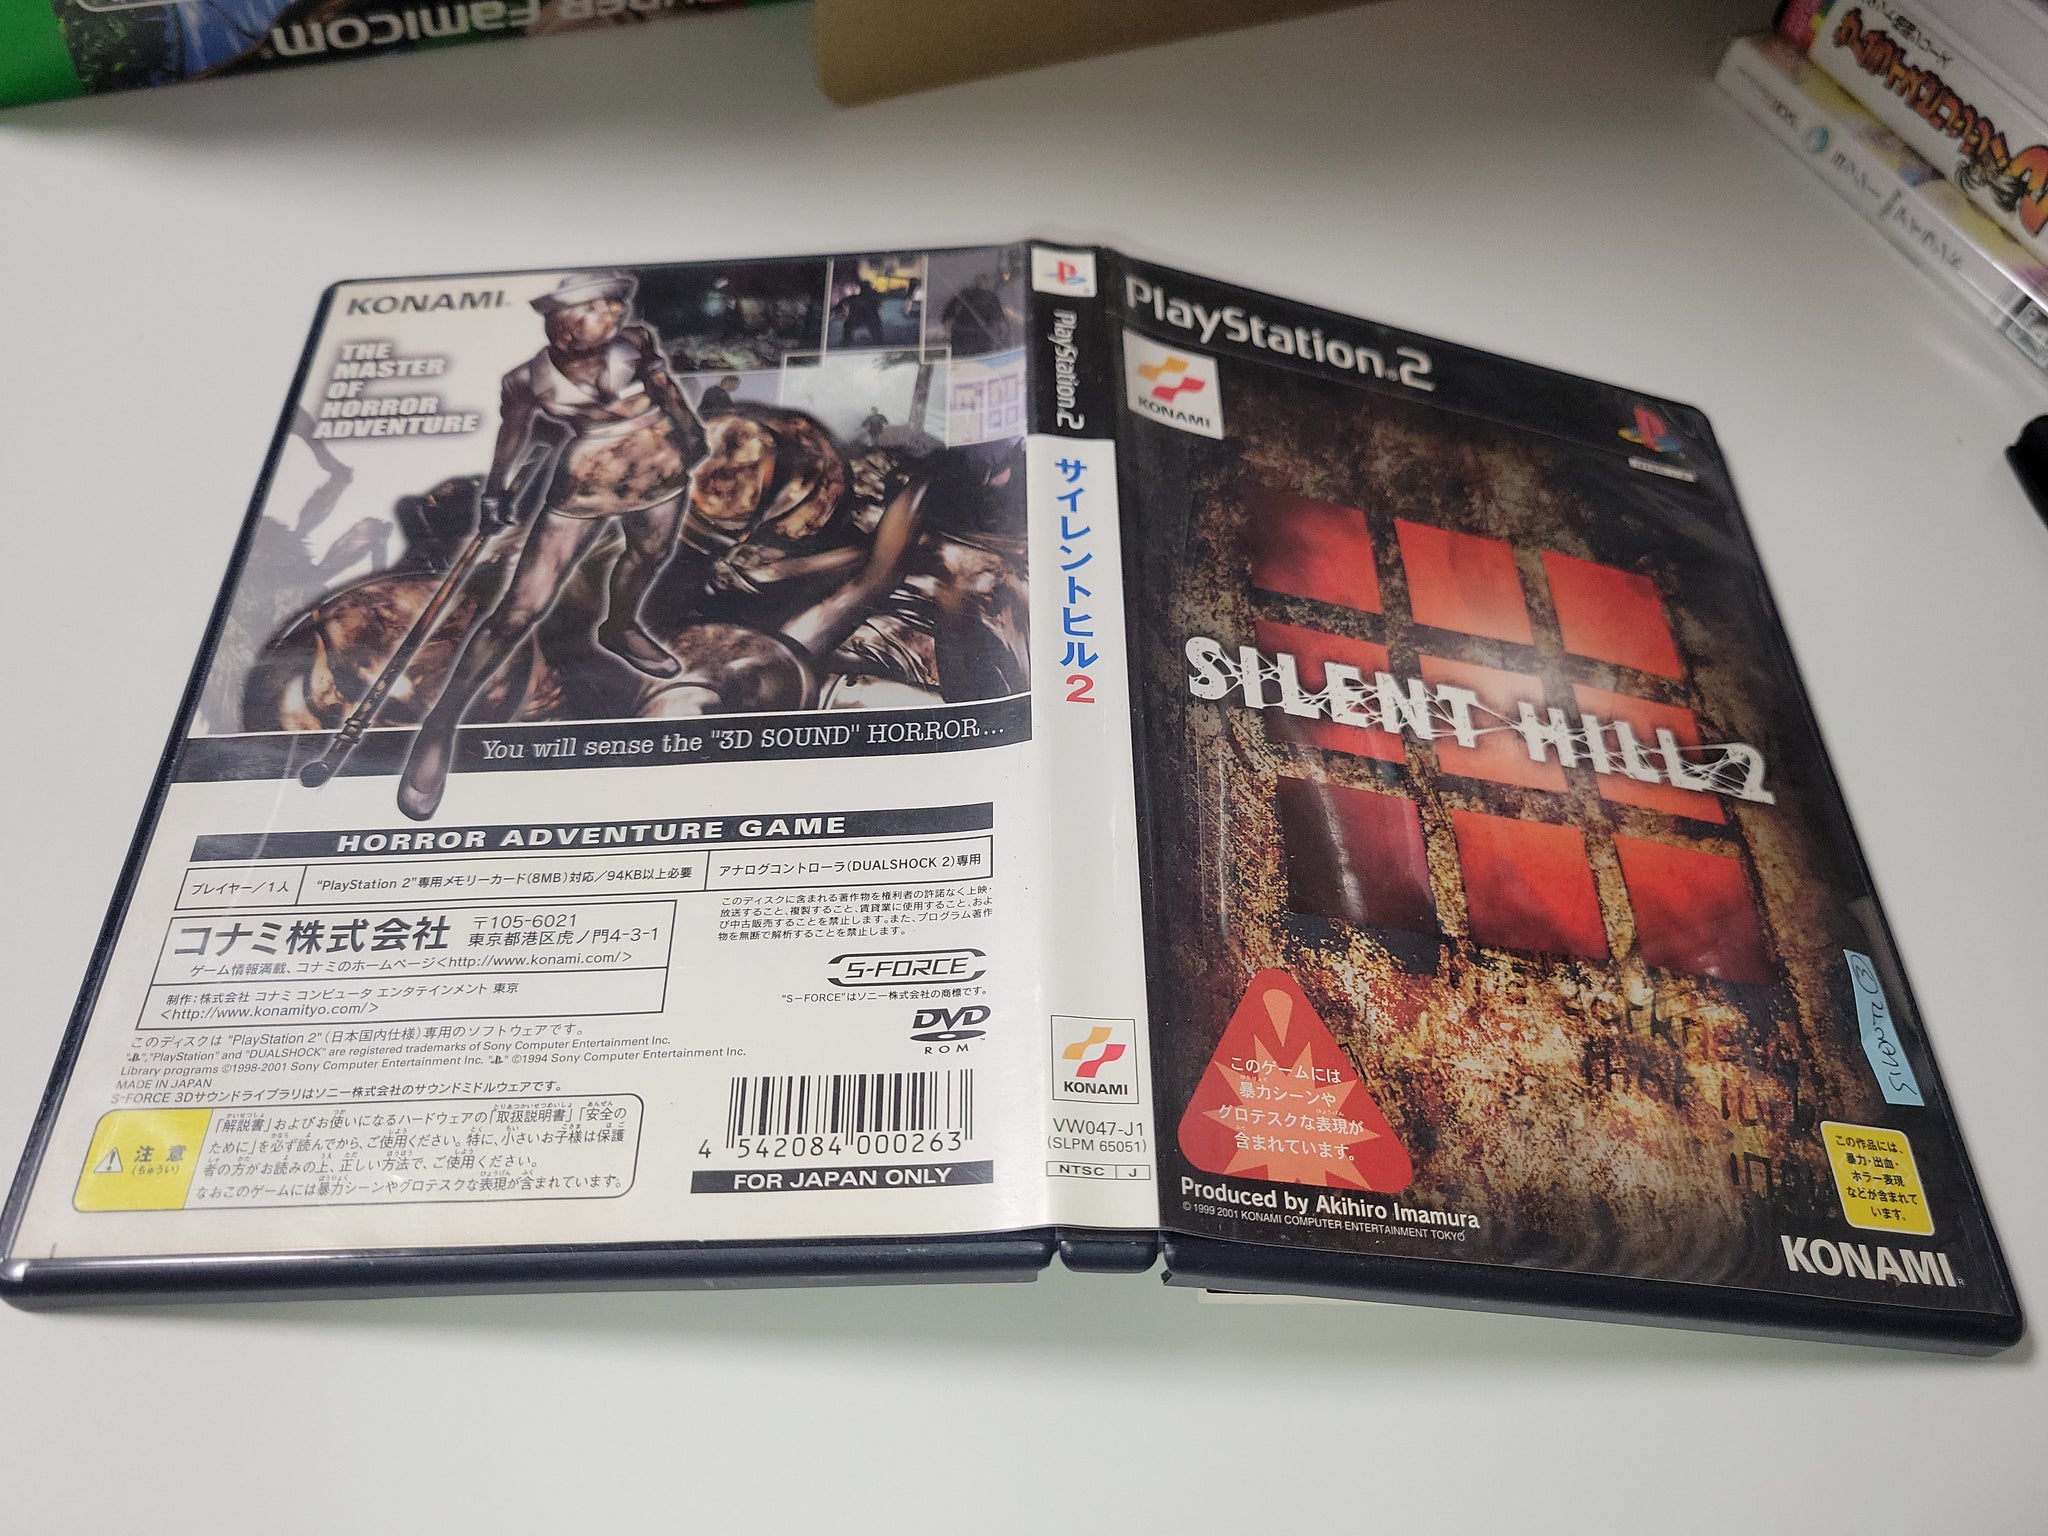 Silent Hill 2 (PlayStation 2, 2001) for sale online